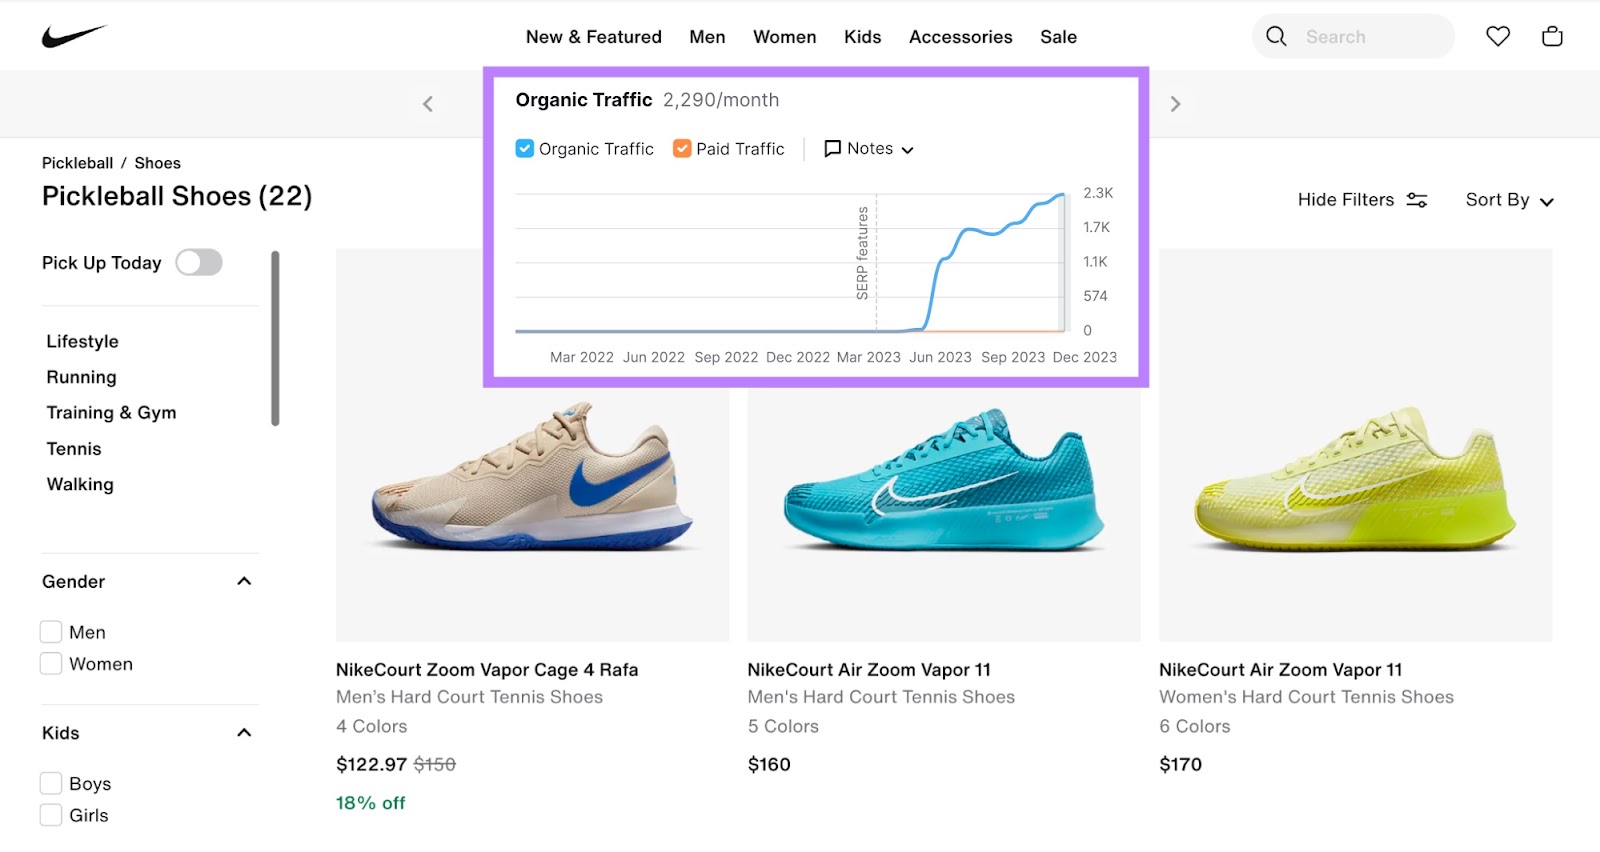 Pickleball Shoes merchandise  class  connected  Nike's page